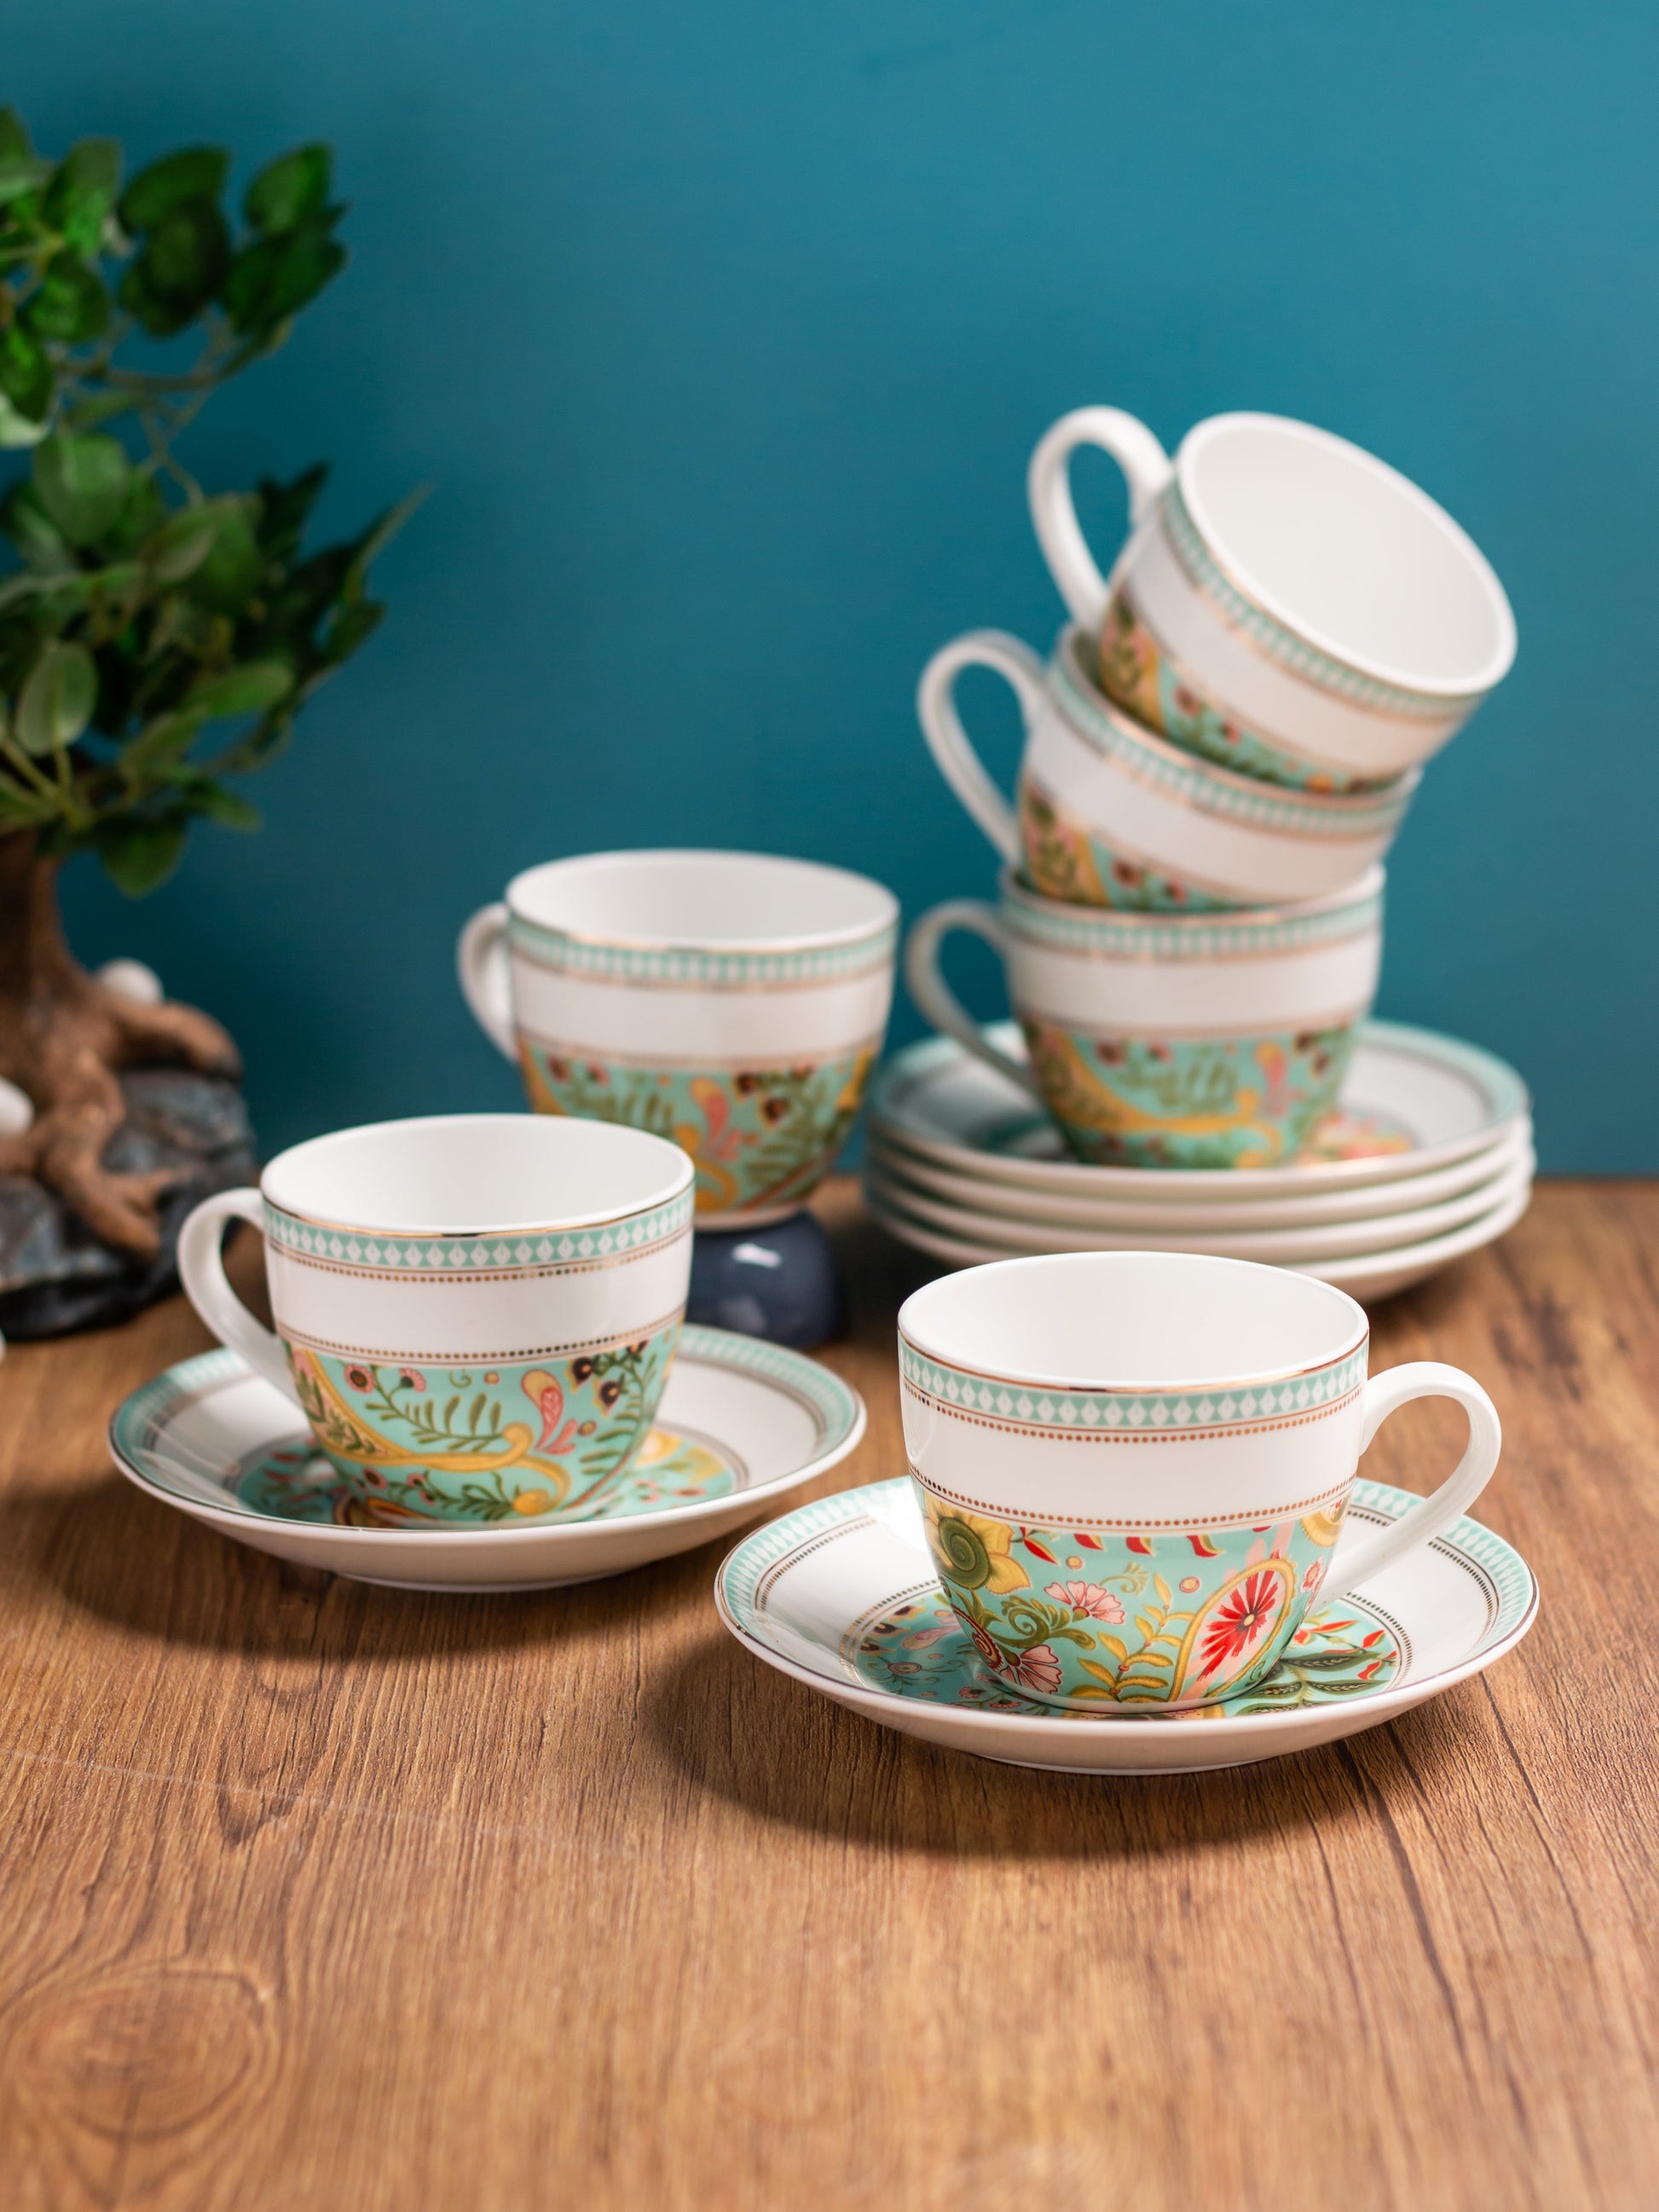 Buy Ceramic Cup and Saucer Sets  Cup & Saucer Sets Online @ Best Price –  Clay Craft India